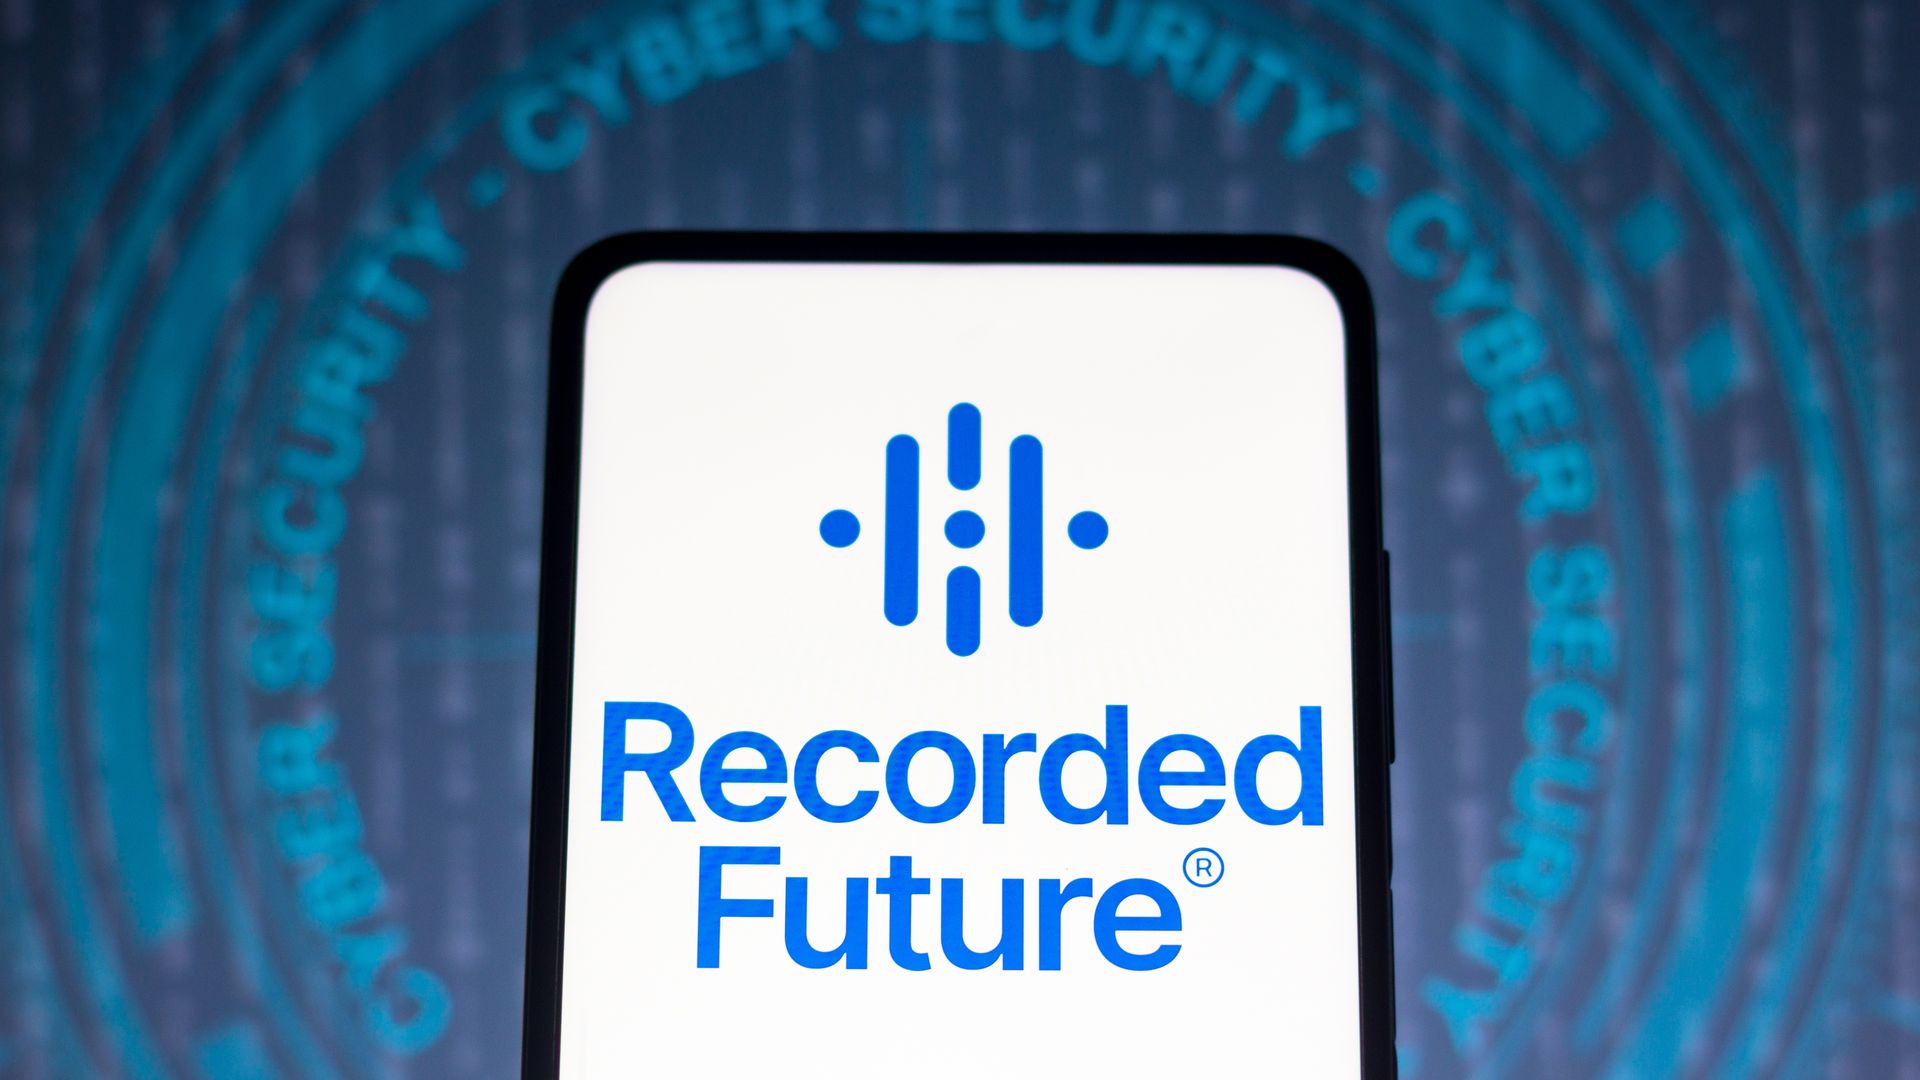 Image of the Recorded Future logo